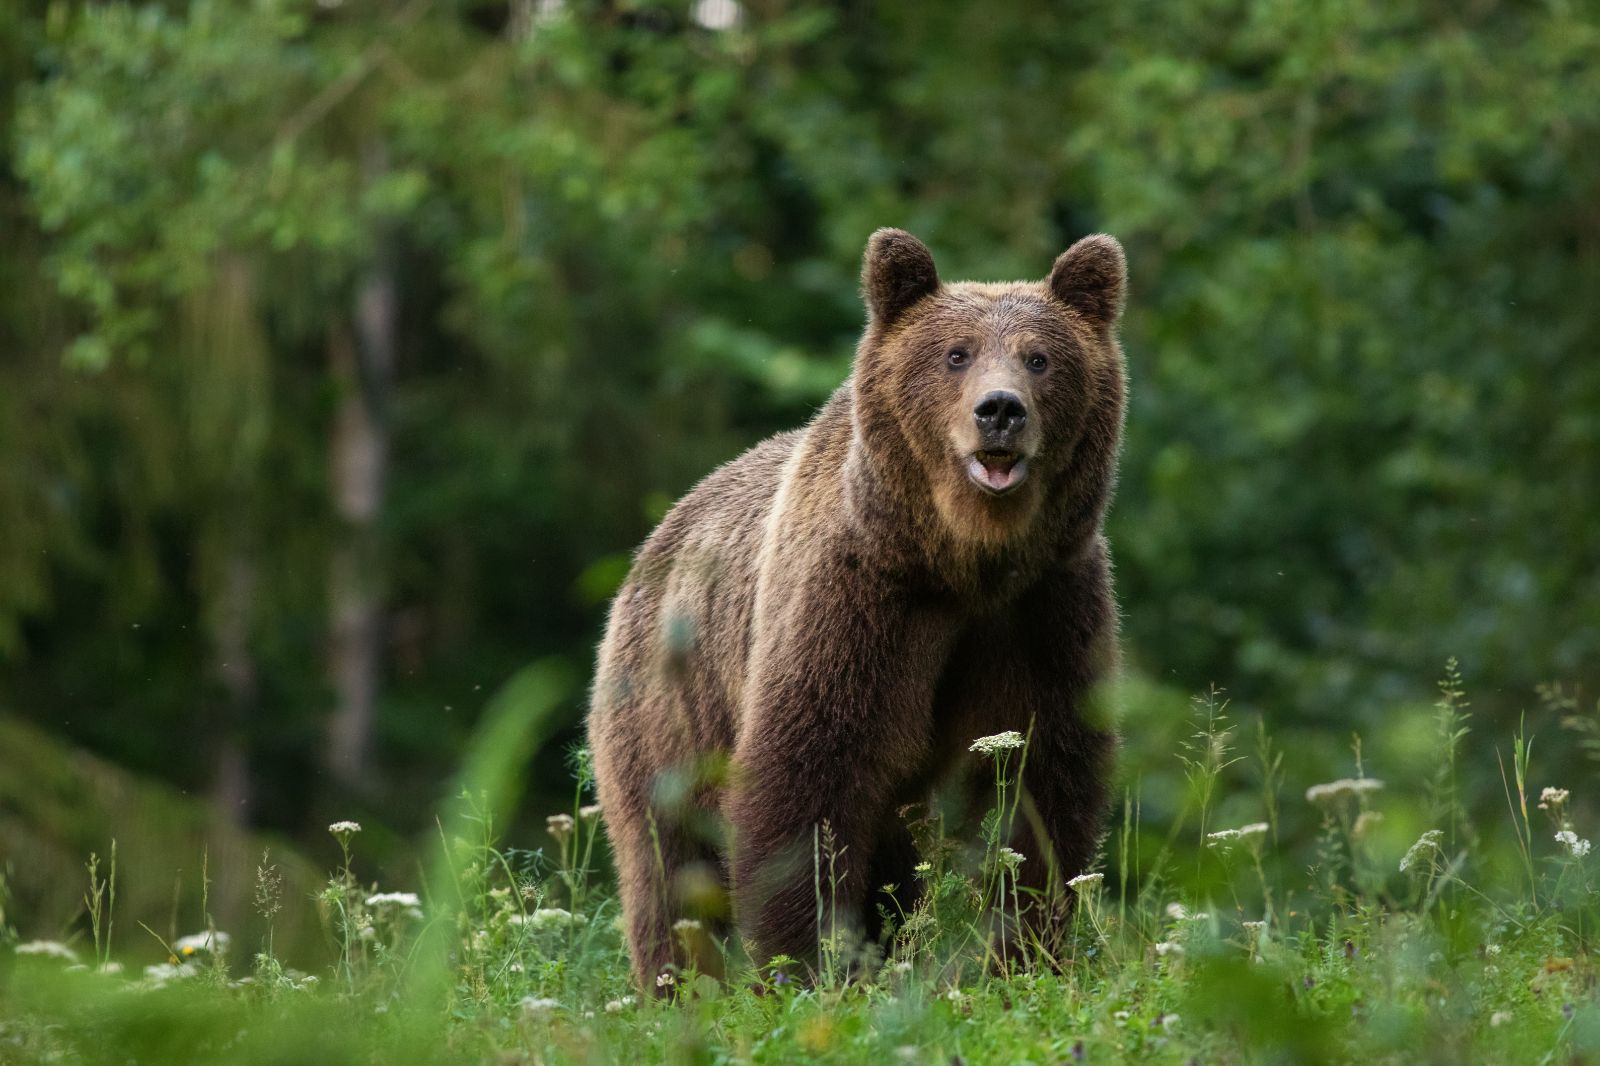 A Carpathian brown bear spotted in the Transylvania region of Romania